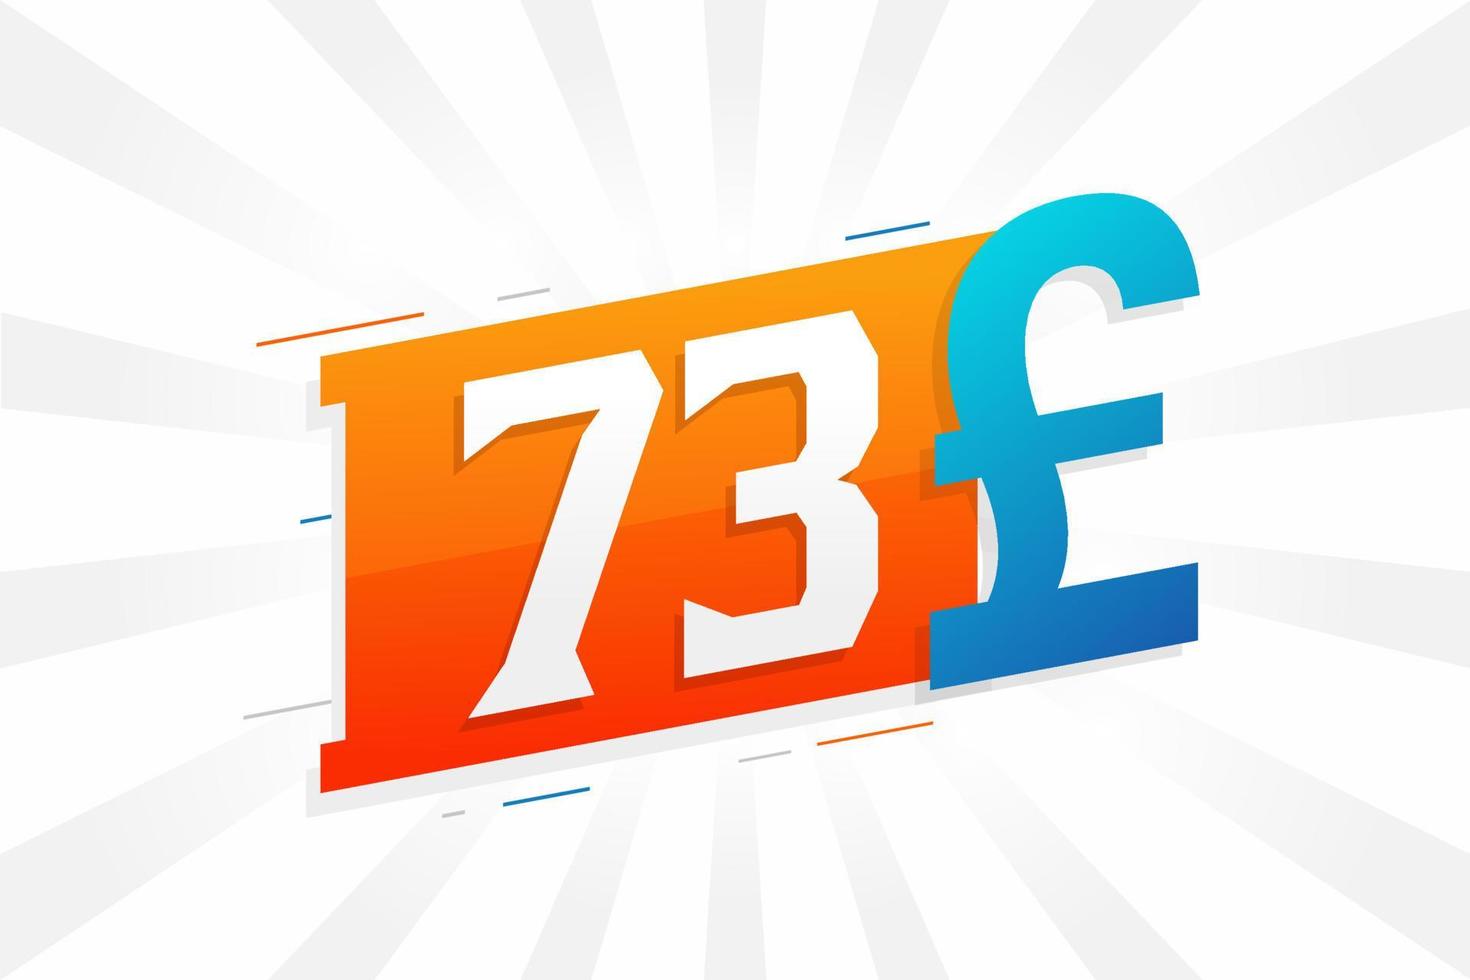 73 Pound Currency vector text symbol. 73 British Pound Money stock vector